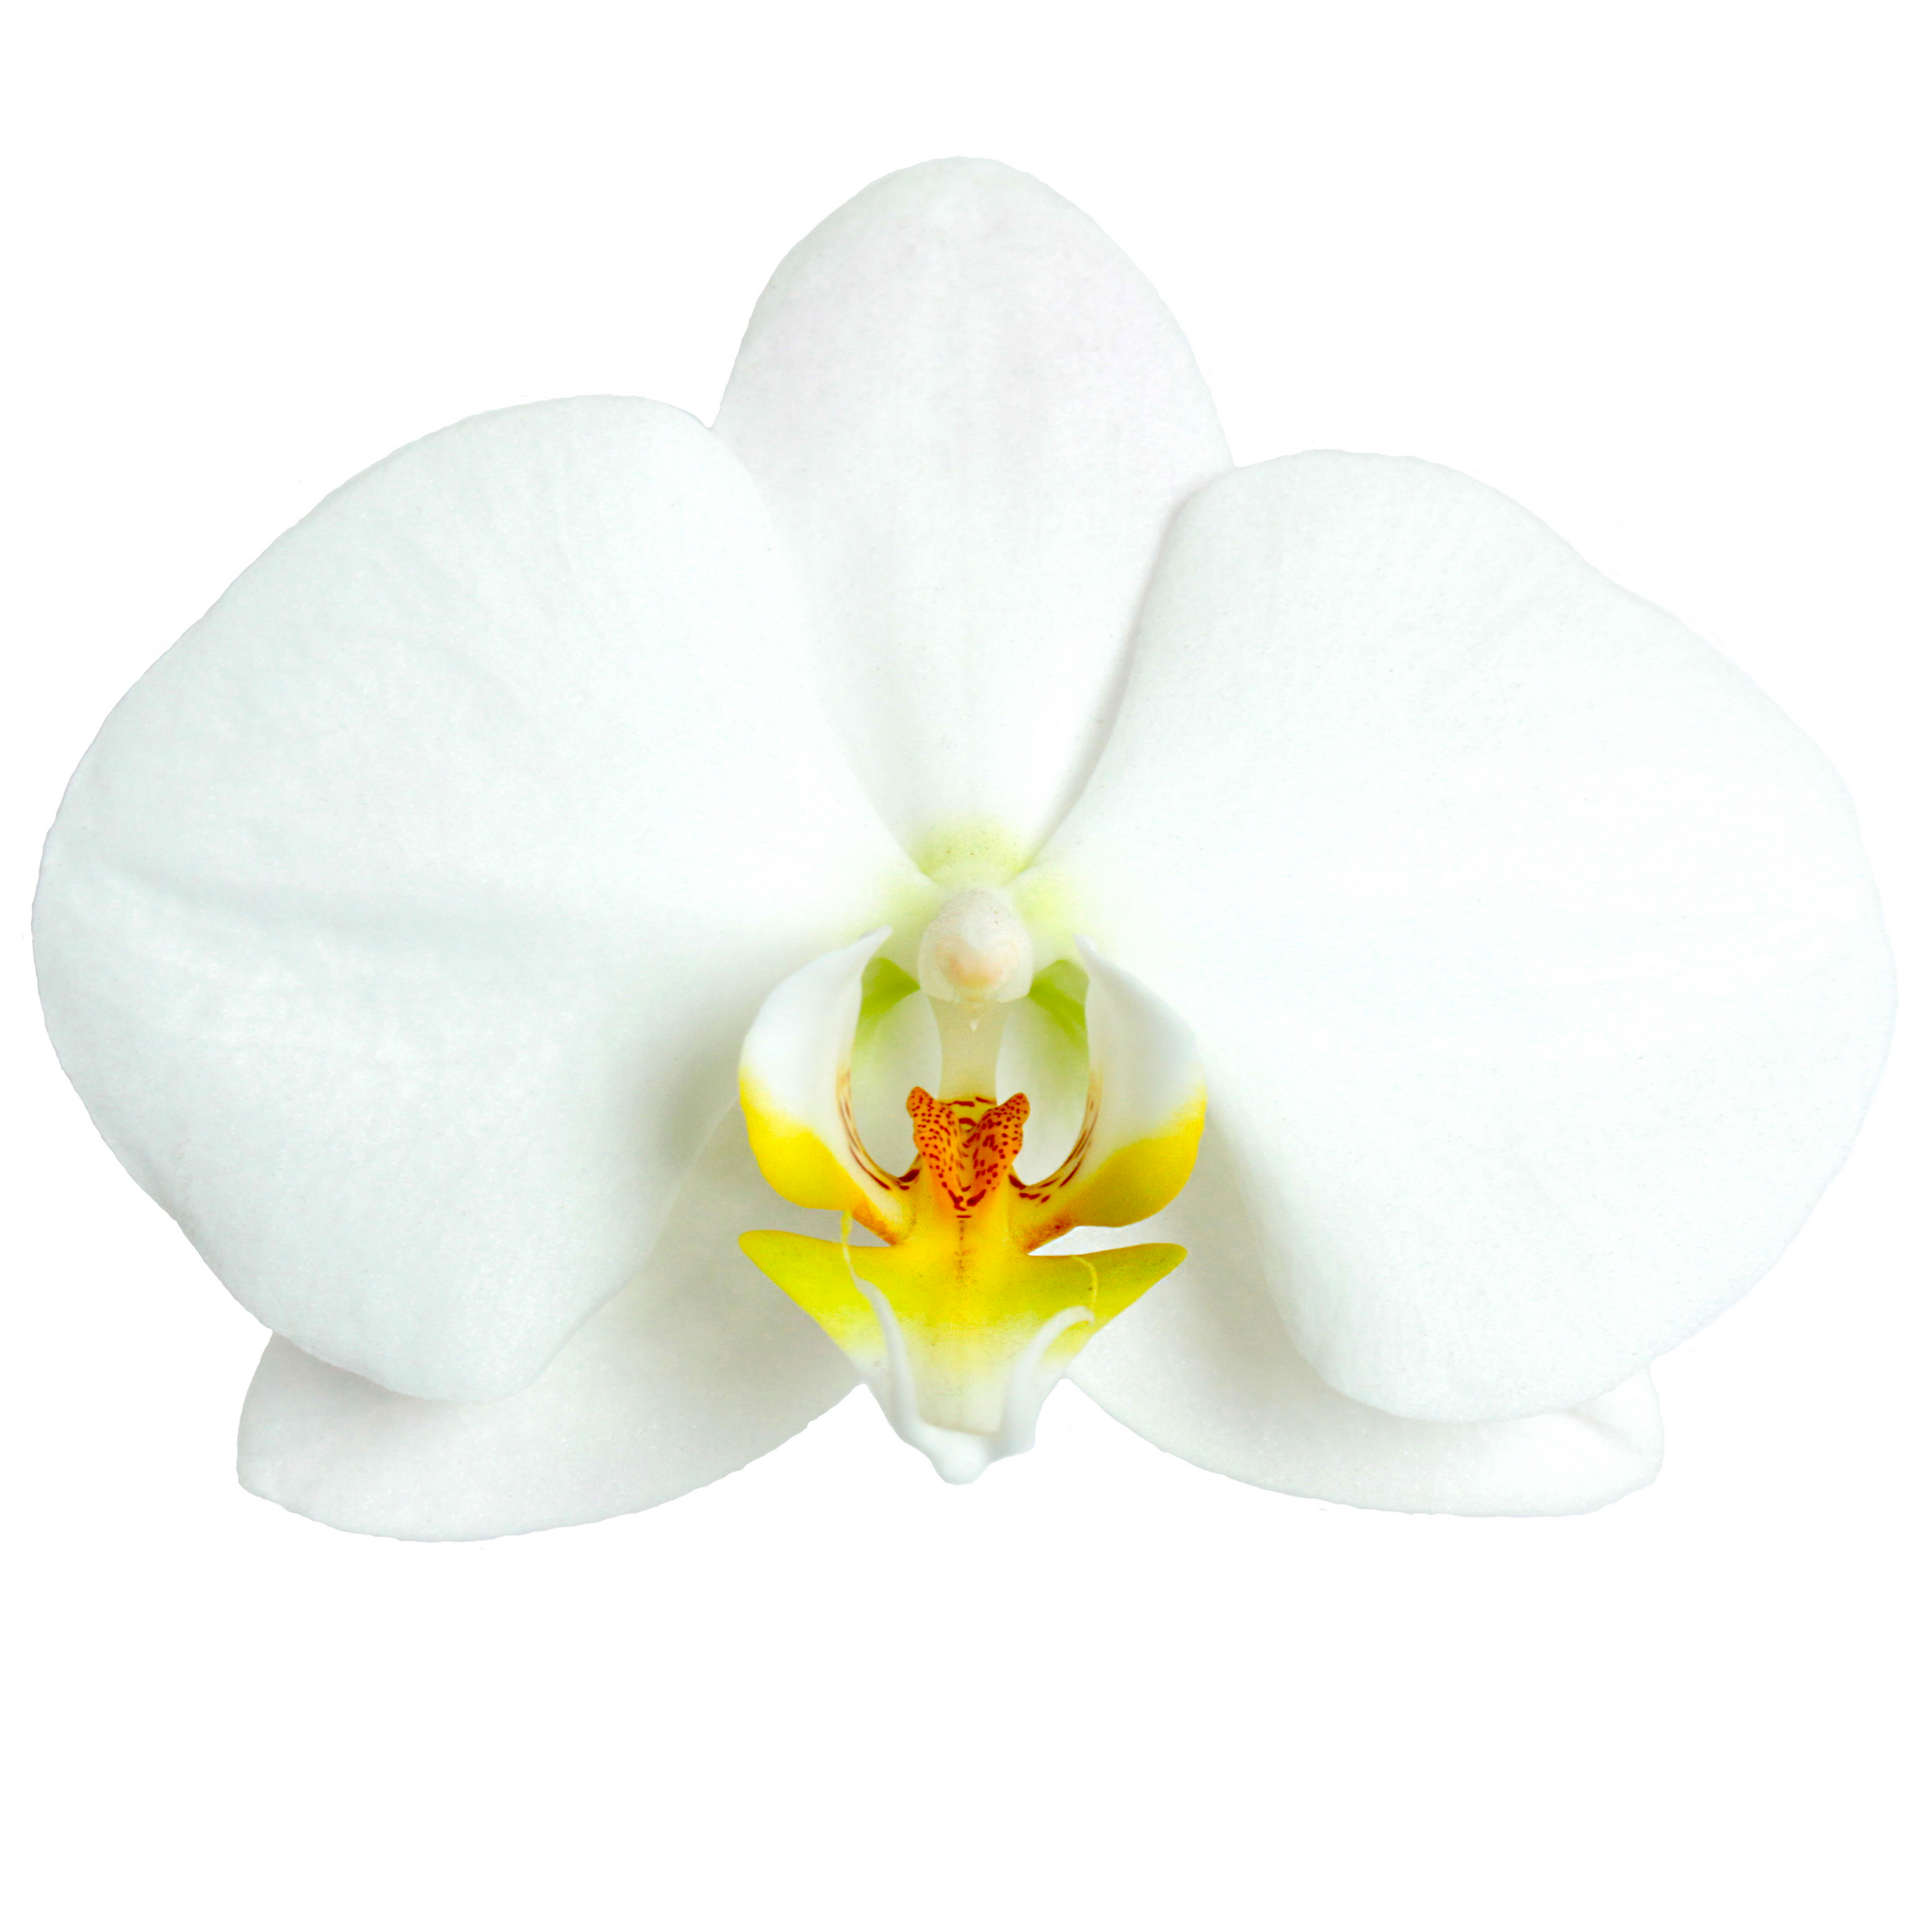 Phalaenopsis Hybride 3 Rispen weiss 12 cm Topf + product picture